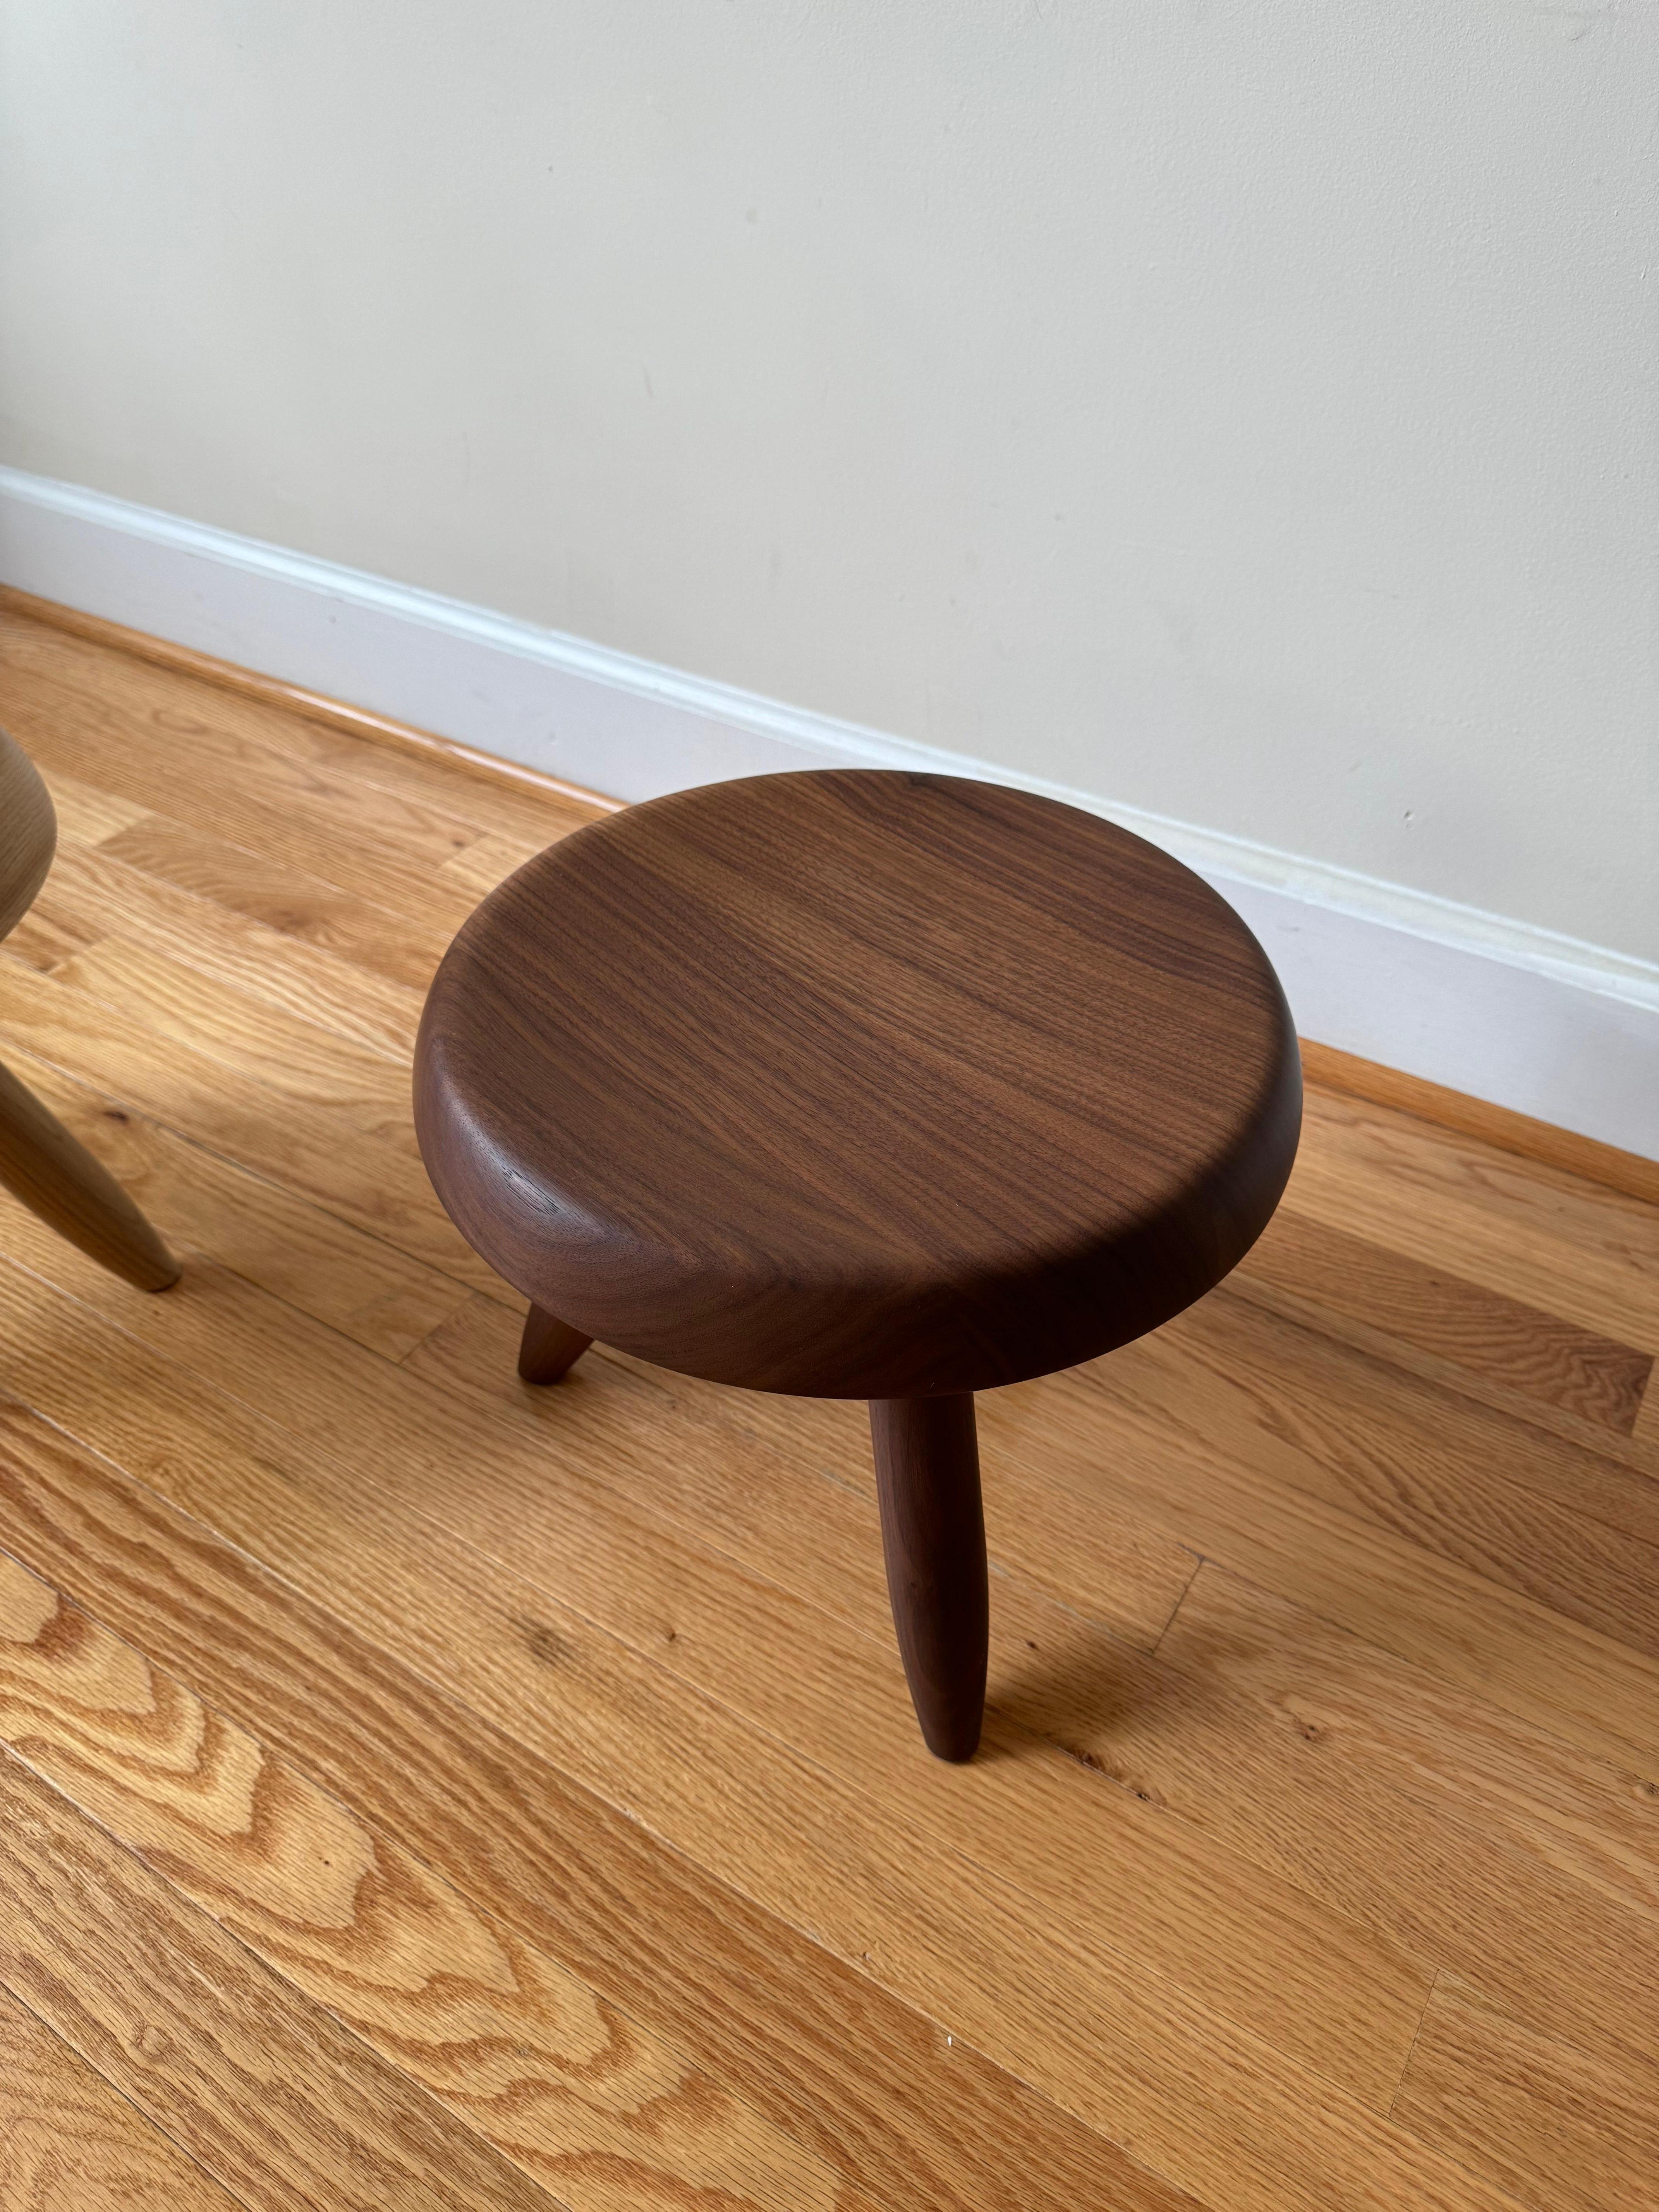 Tabouret Berger (Berger Stool) by Charlotte Perriand for Cassina In Excellent Condition For Sale In Centreville, VA